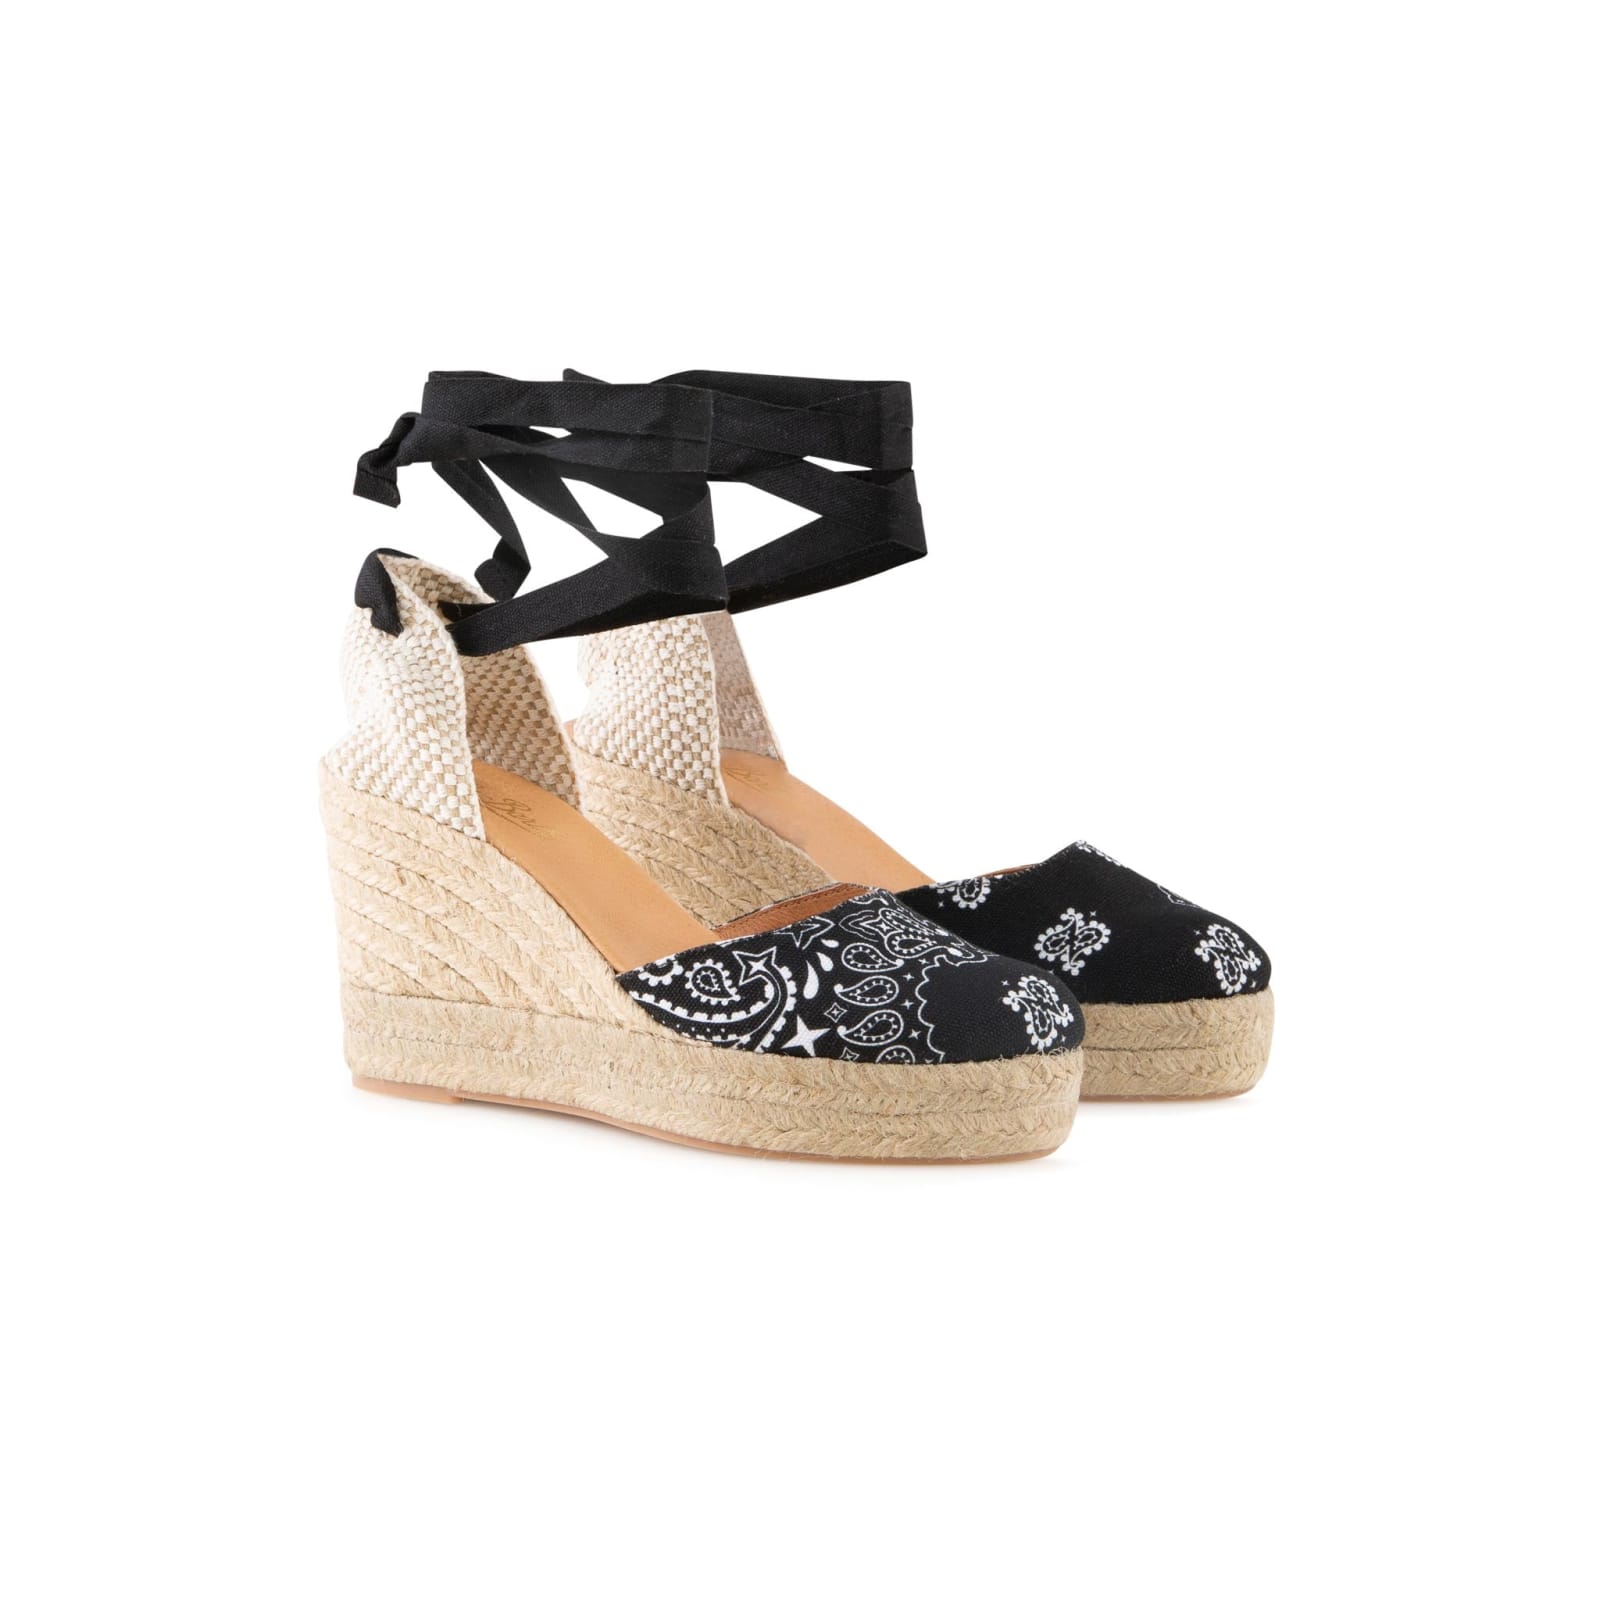 Espadrillas With High Wedge And Ankle Lace